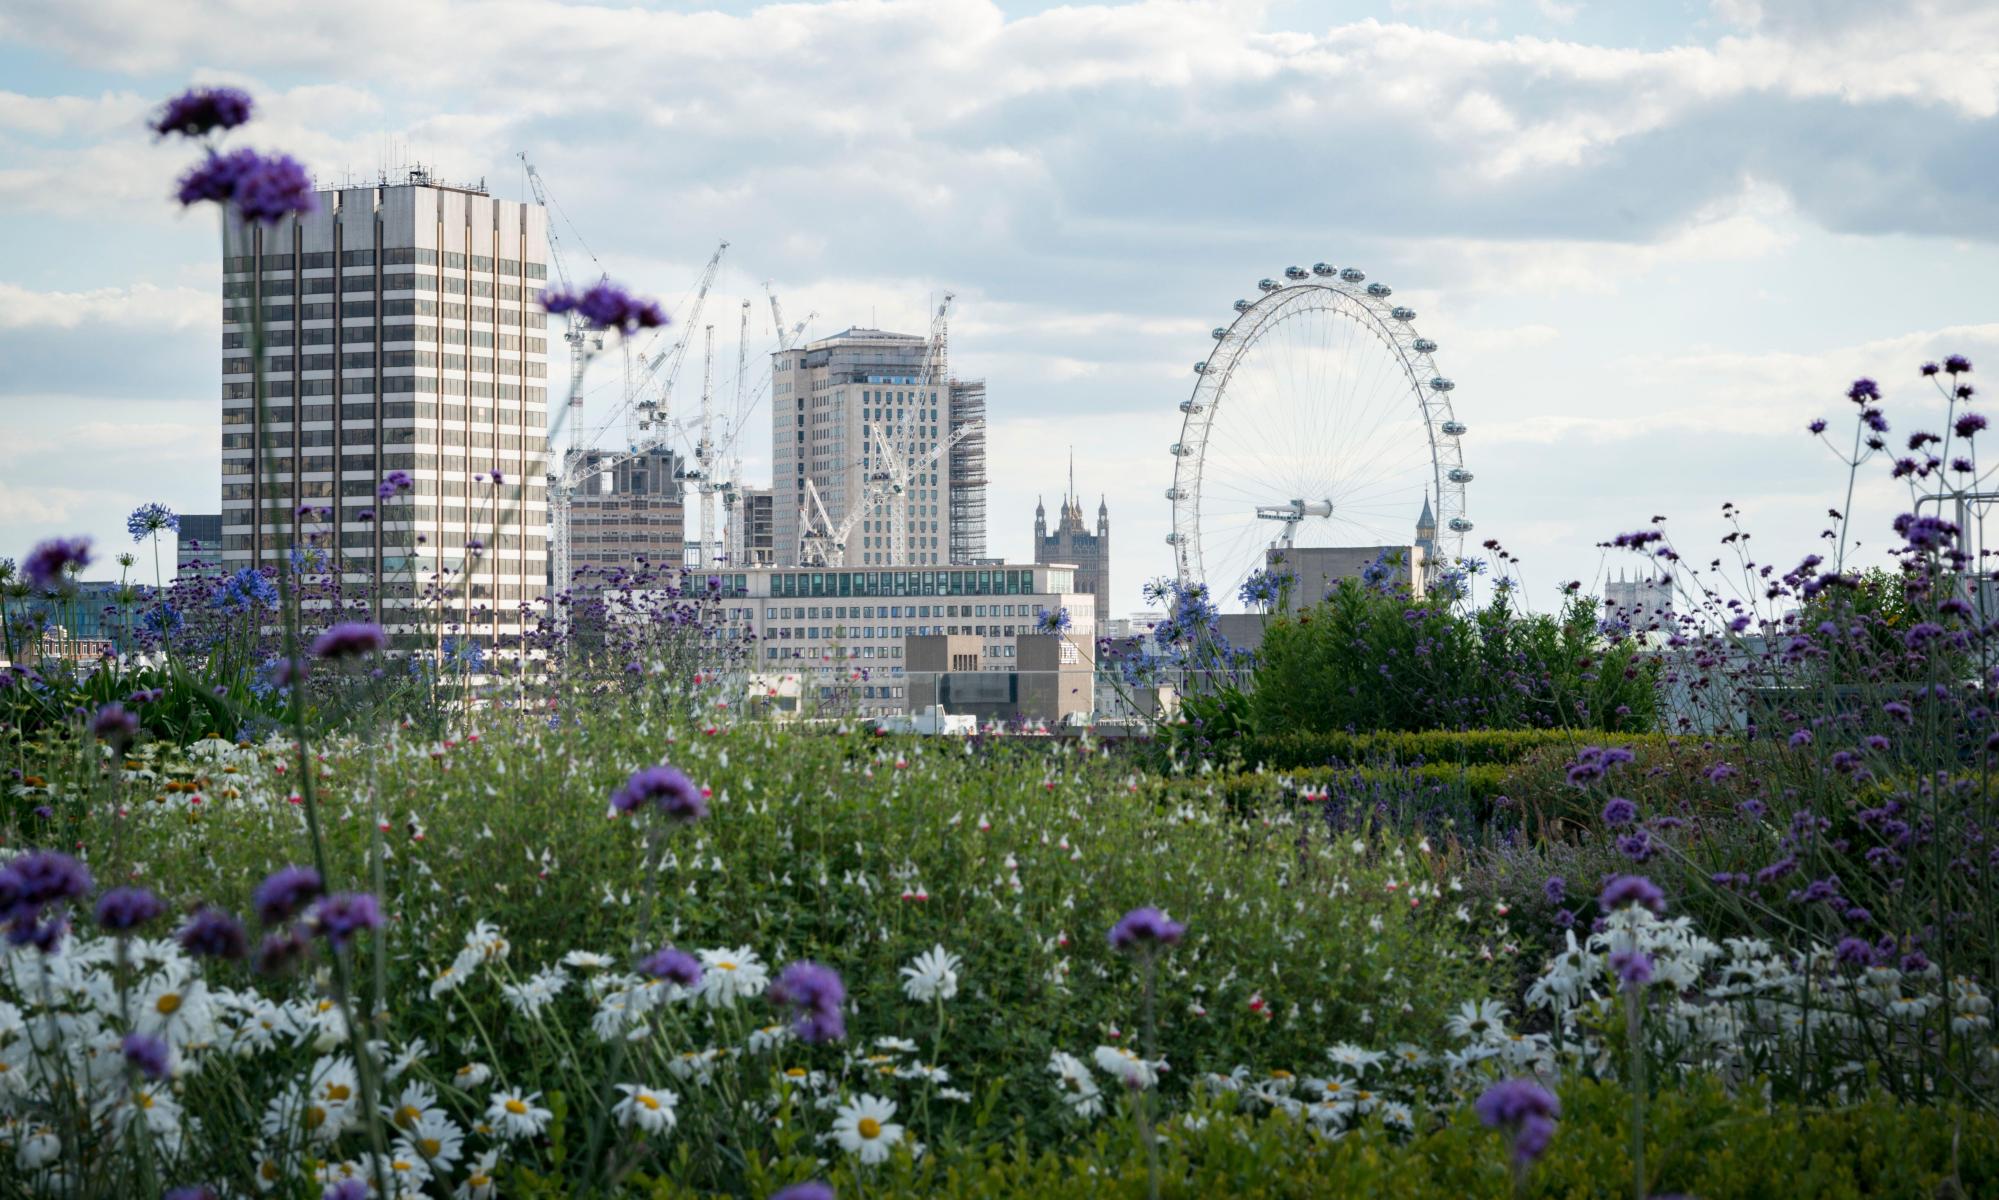 Mini forest and ‘green tower’ plans among first to meet London’s new green guidelines 